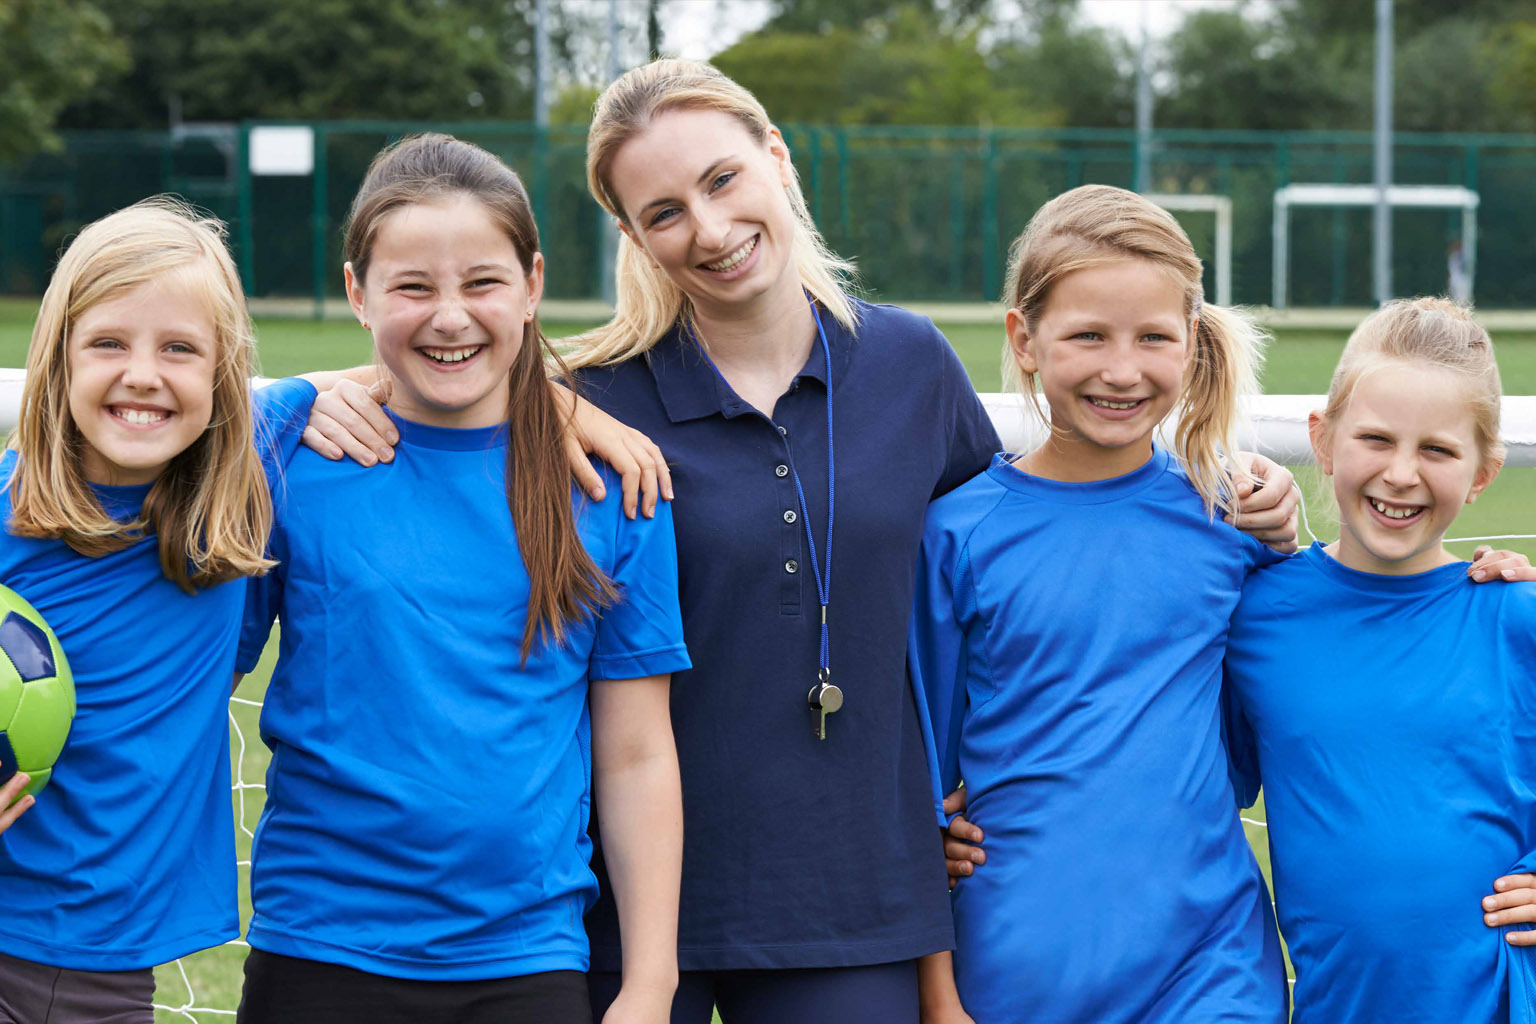 Four girls in blue team uniforms stand arm in arm with a woman wearing a whistle around her neck. One of the girls holds a soccer ball.